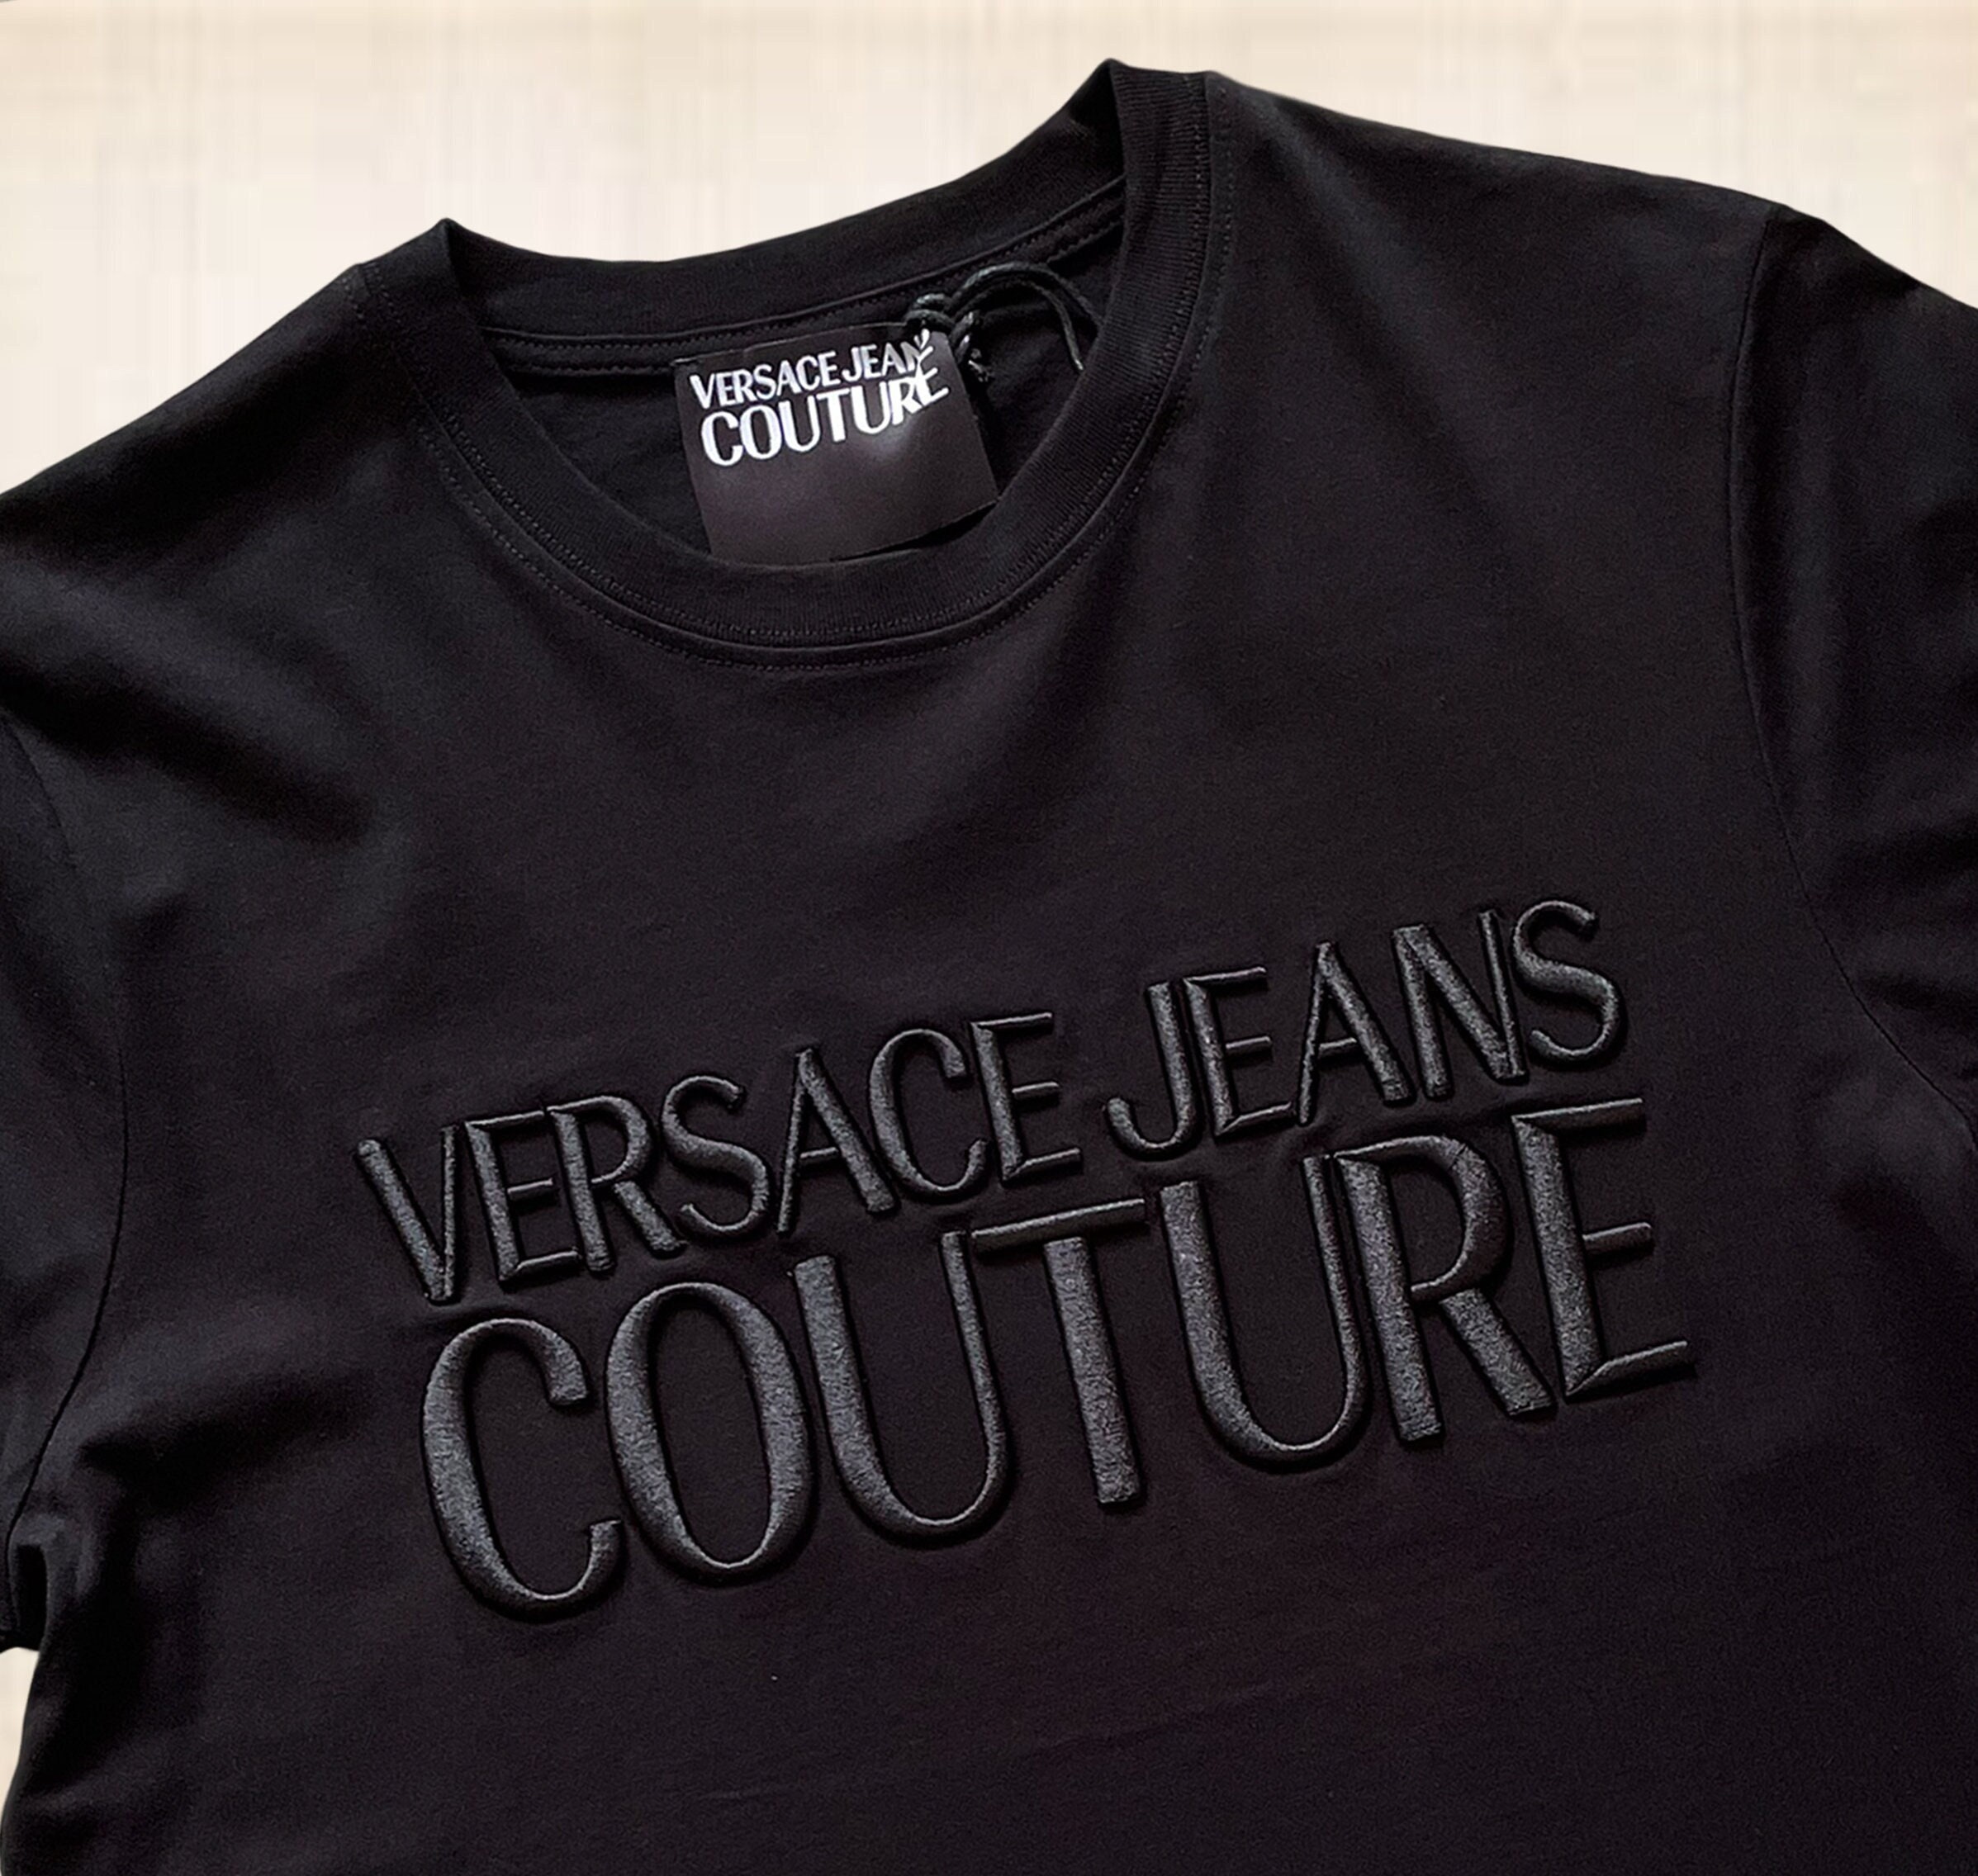 9 Versace shirts ideas  versace shirts, louis vuitton shirts, black  hairstyles with weave